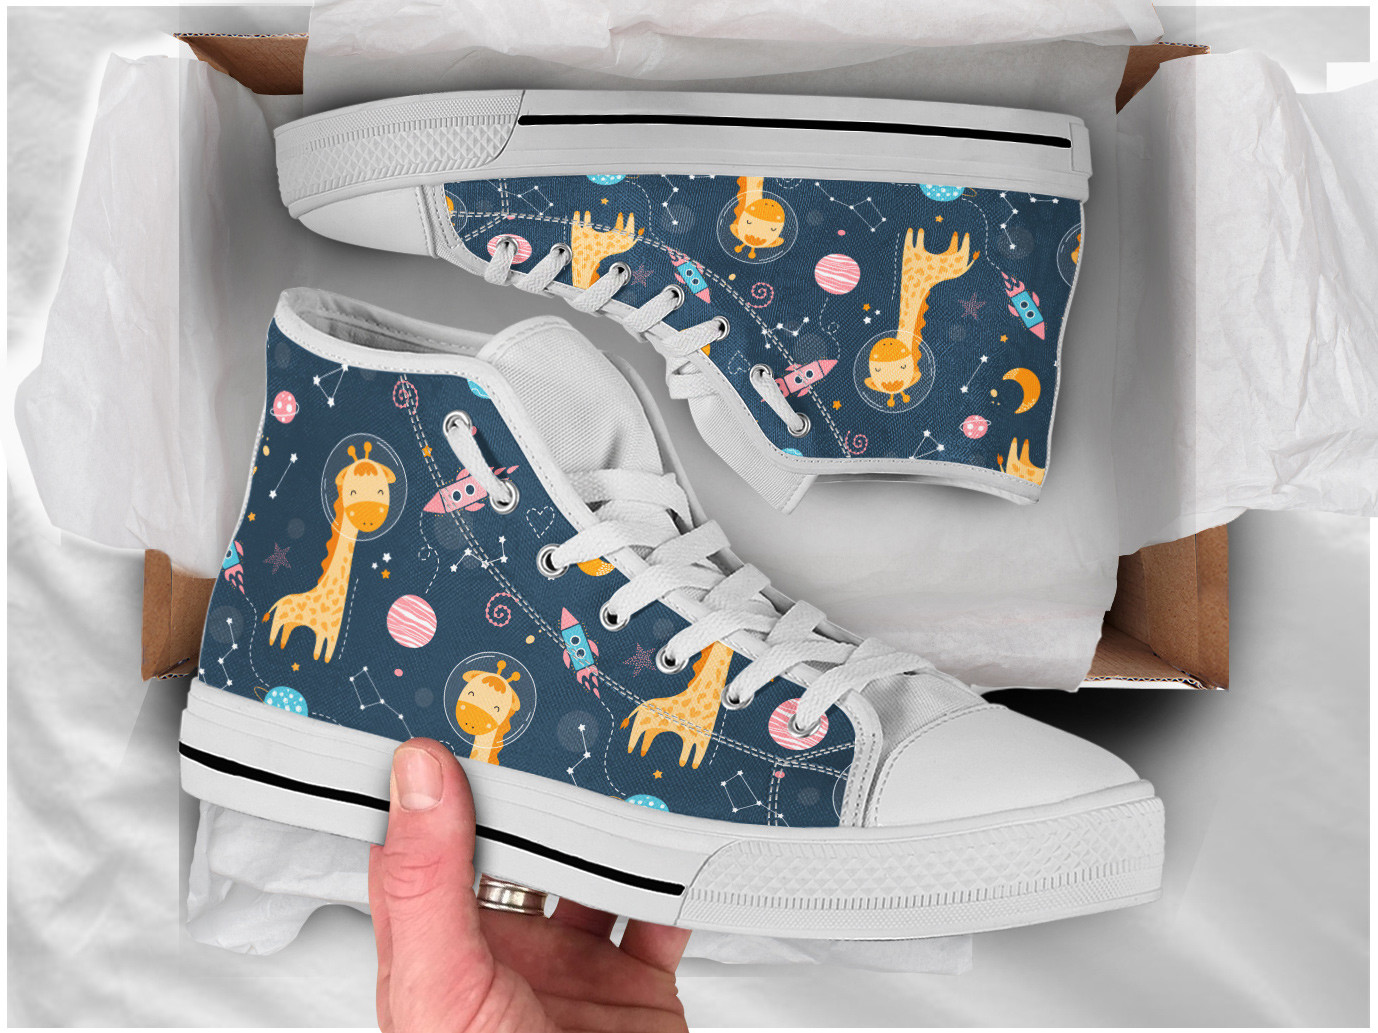 Astranaut Giraffe Shoes | Custom High Top Sneakers For Kids & Adults